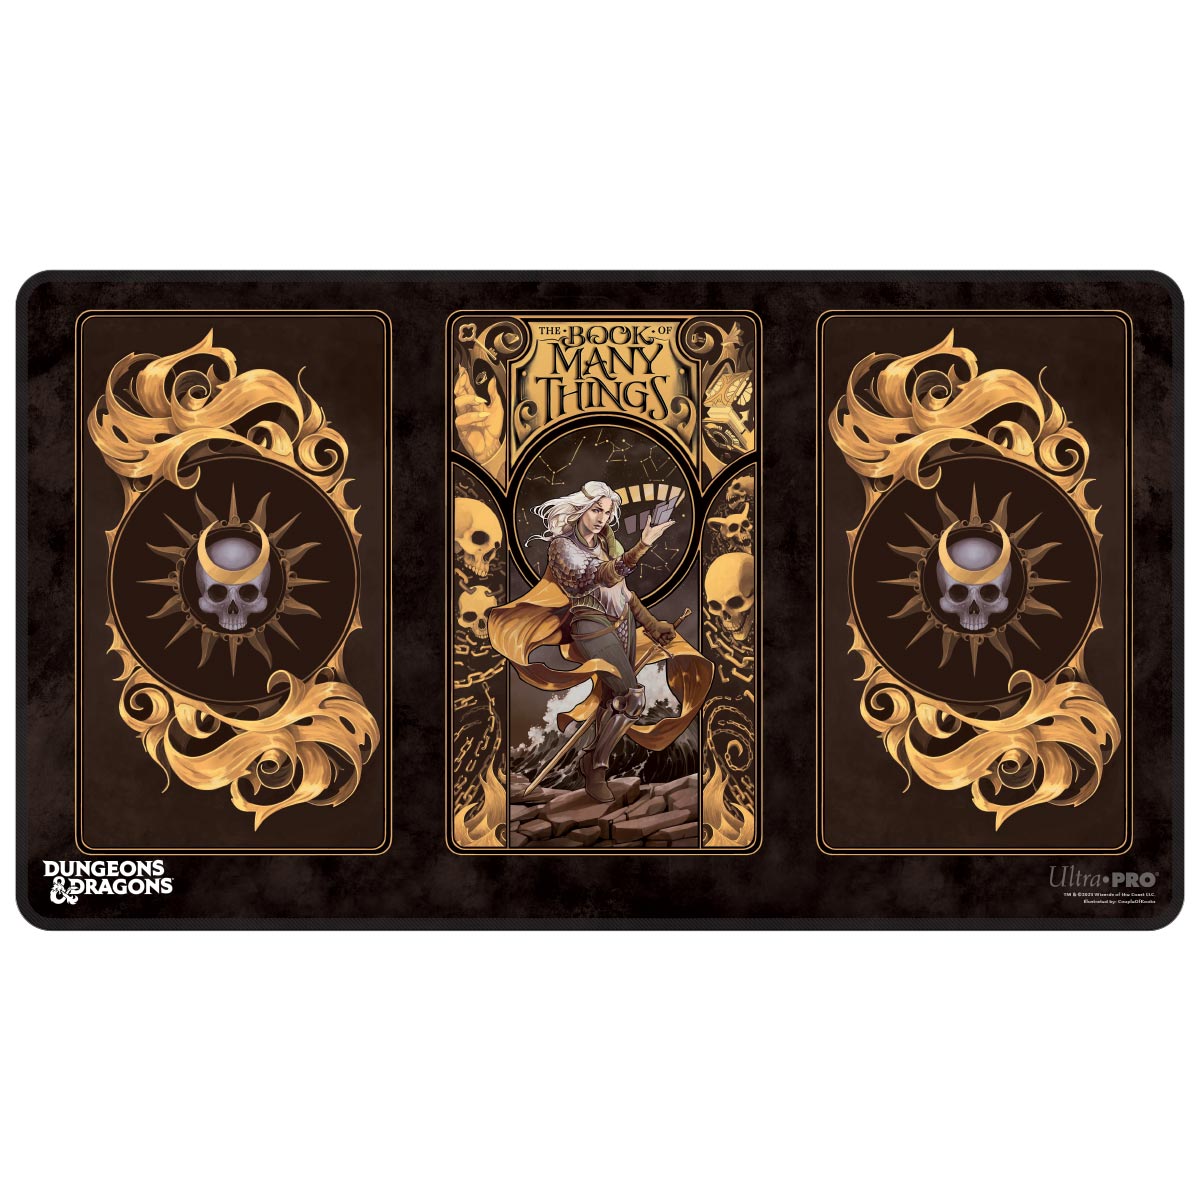 Dungeons & Dragons: The Deck of Many Things Black Stitched Playmat Featuring: Alternate Cover Artwork